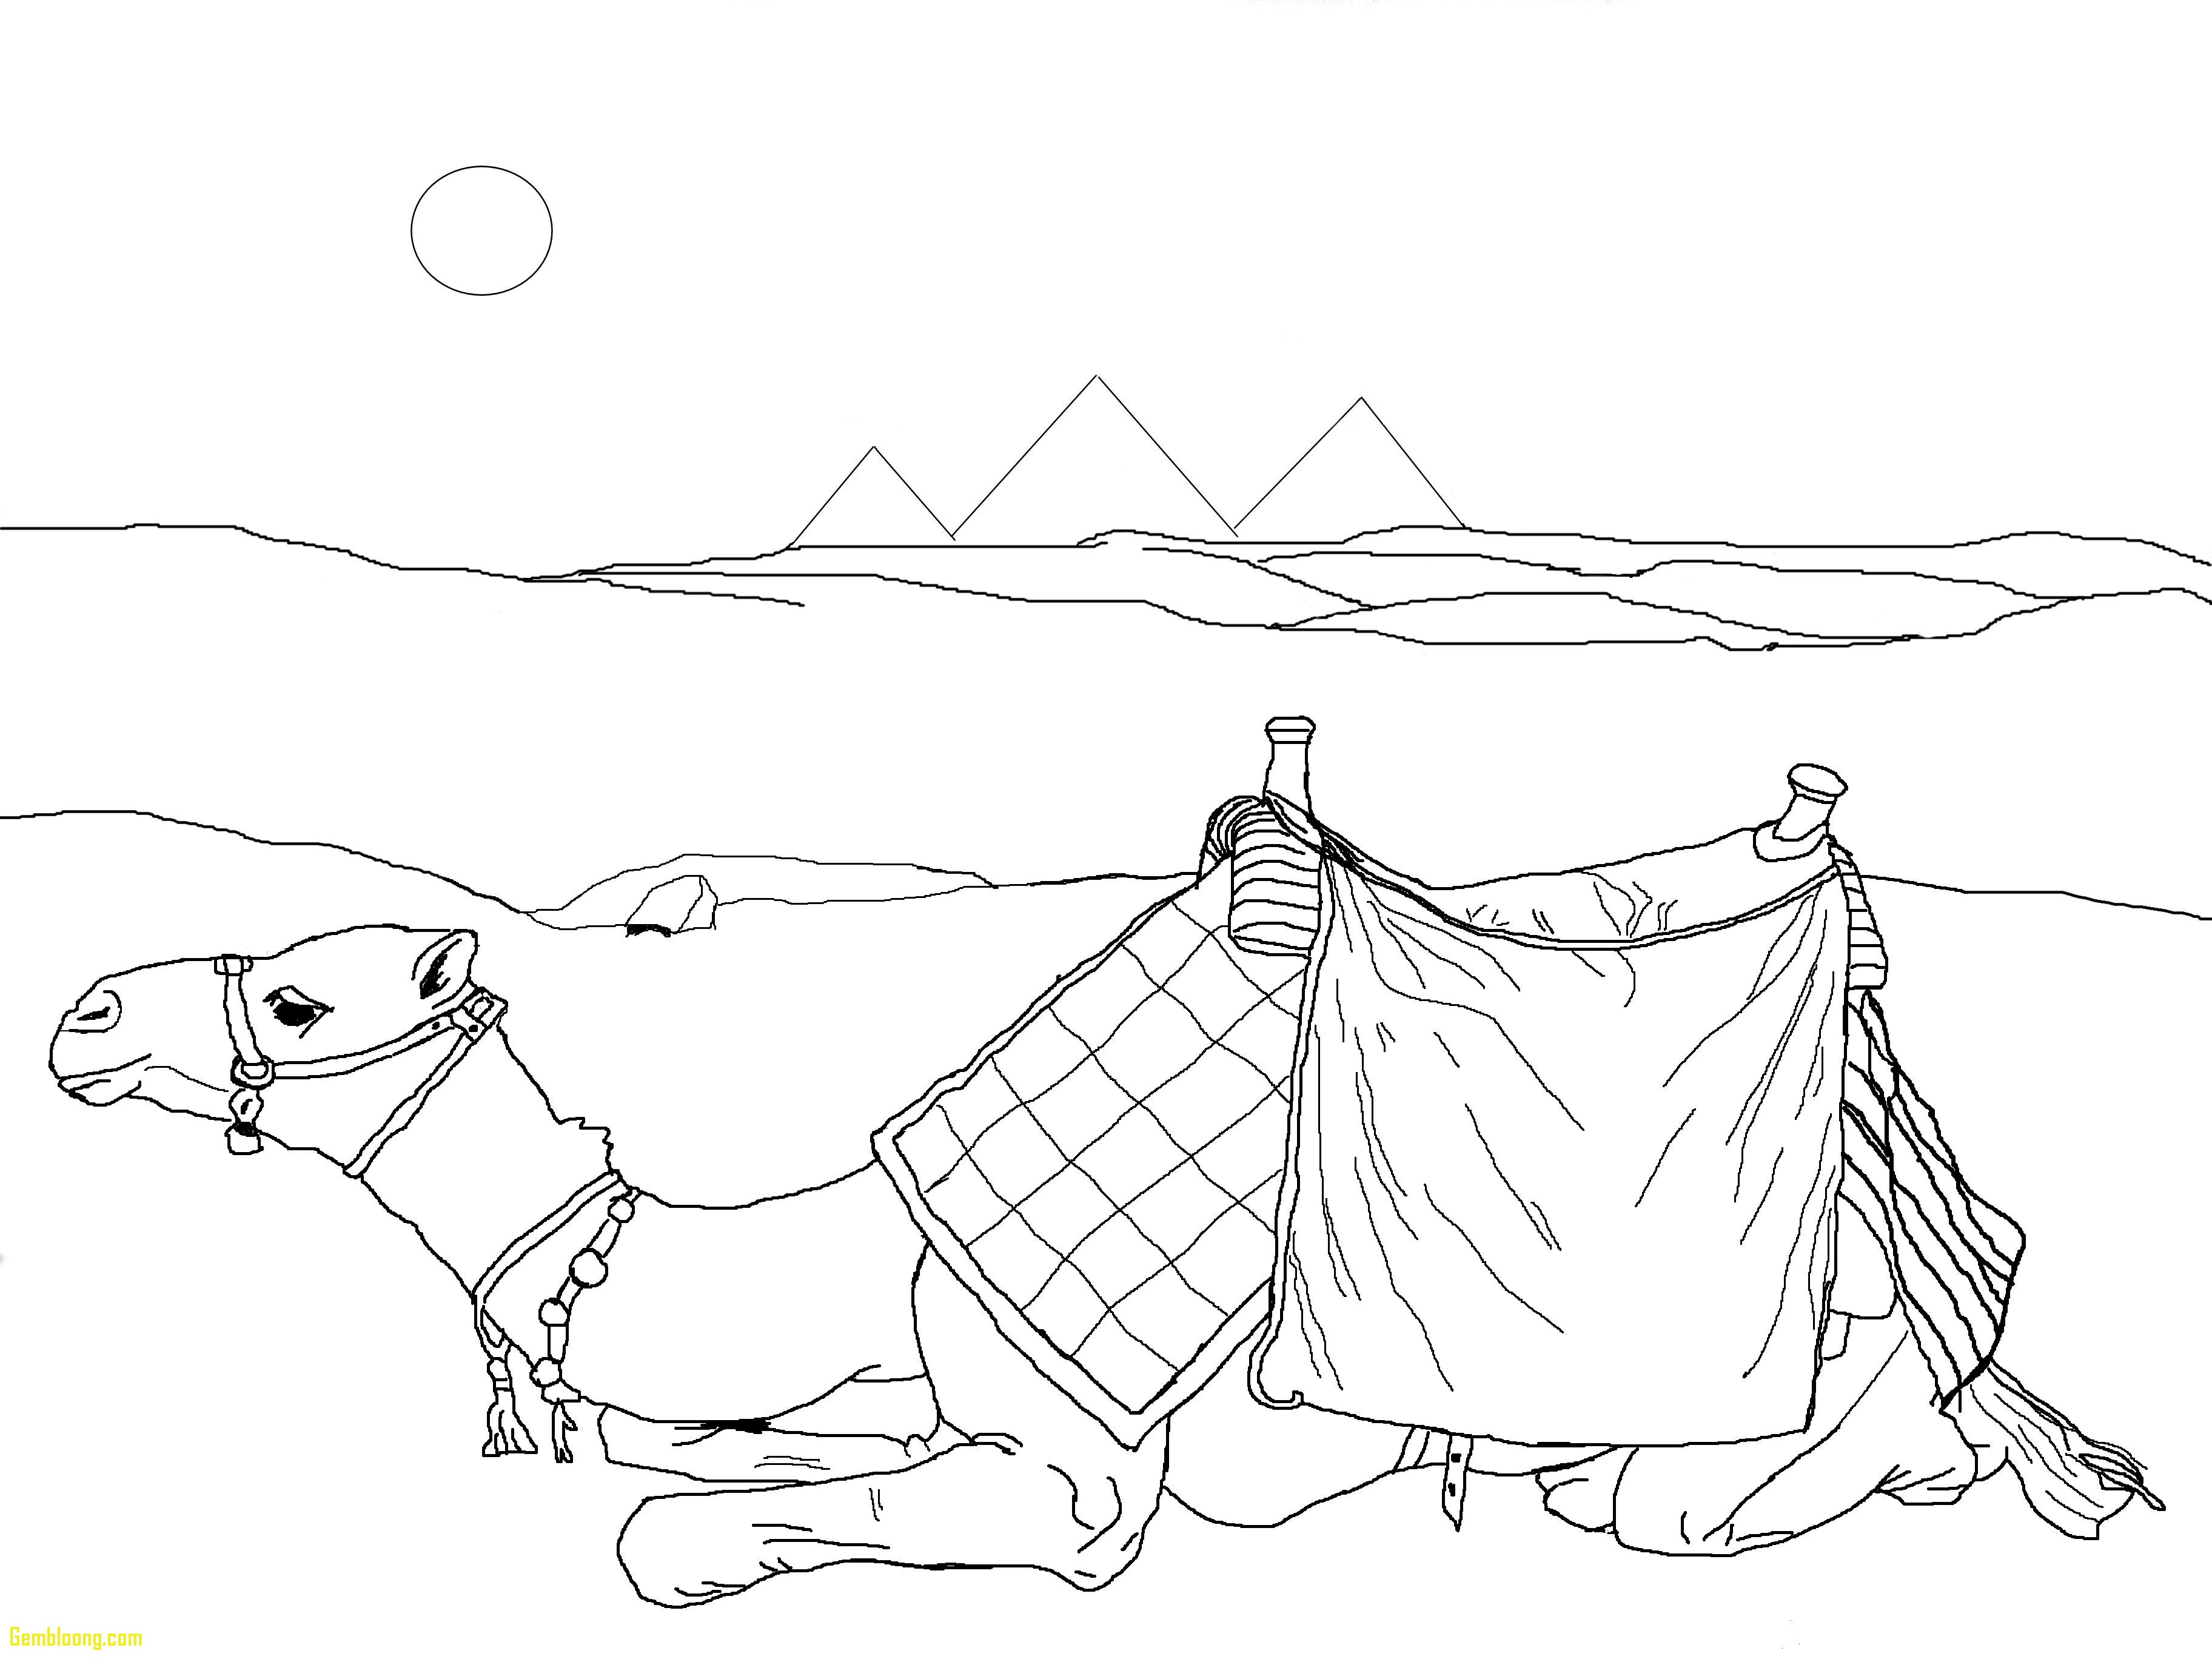 Desert Scene Coloring Page At GetDrawings Free Download